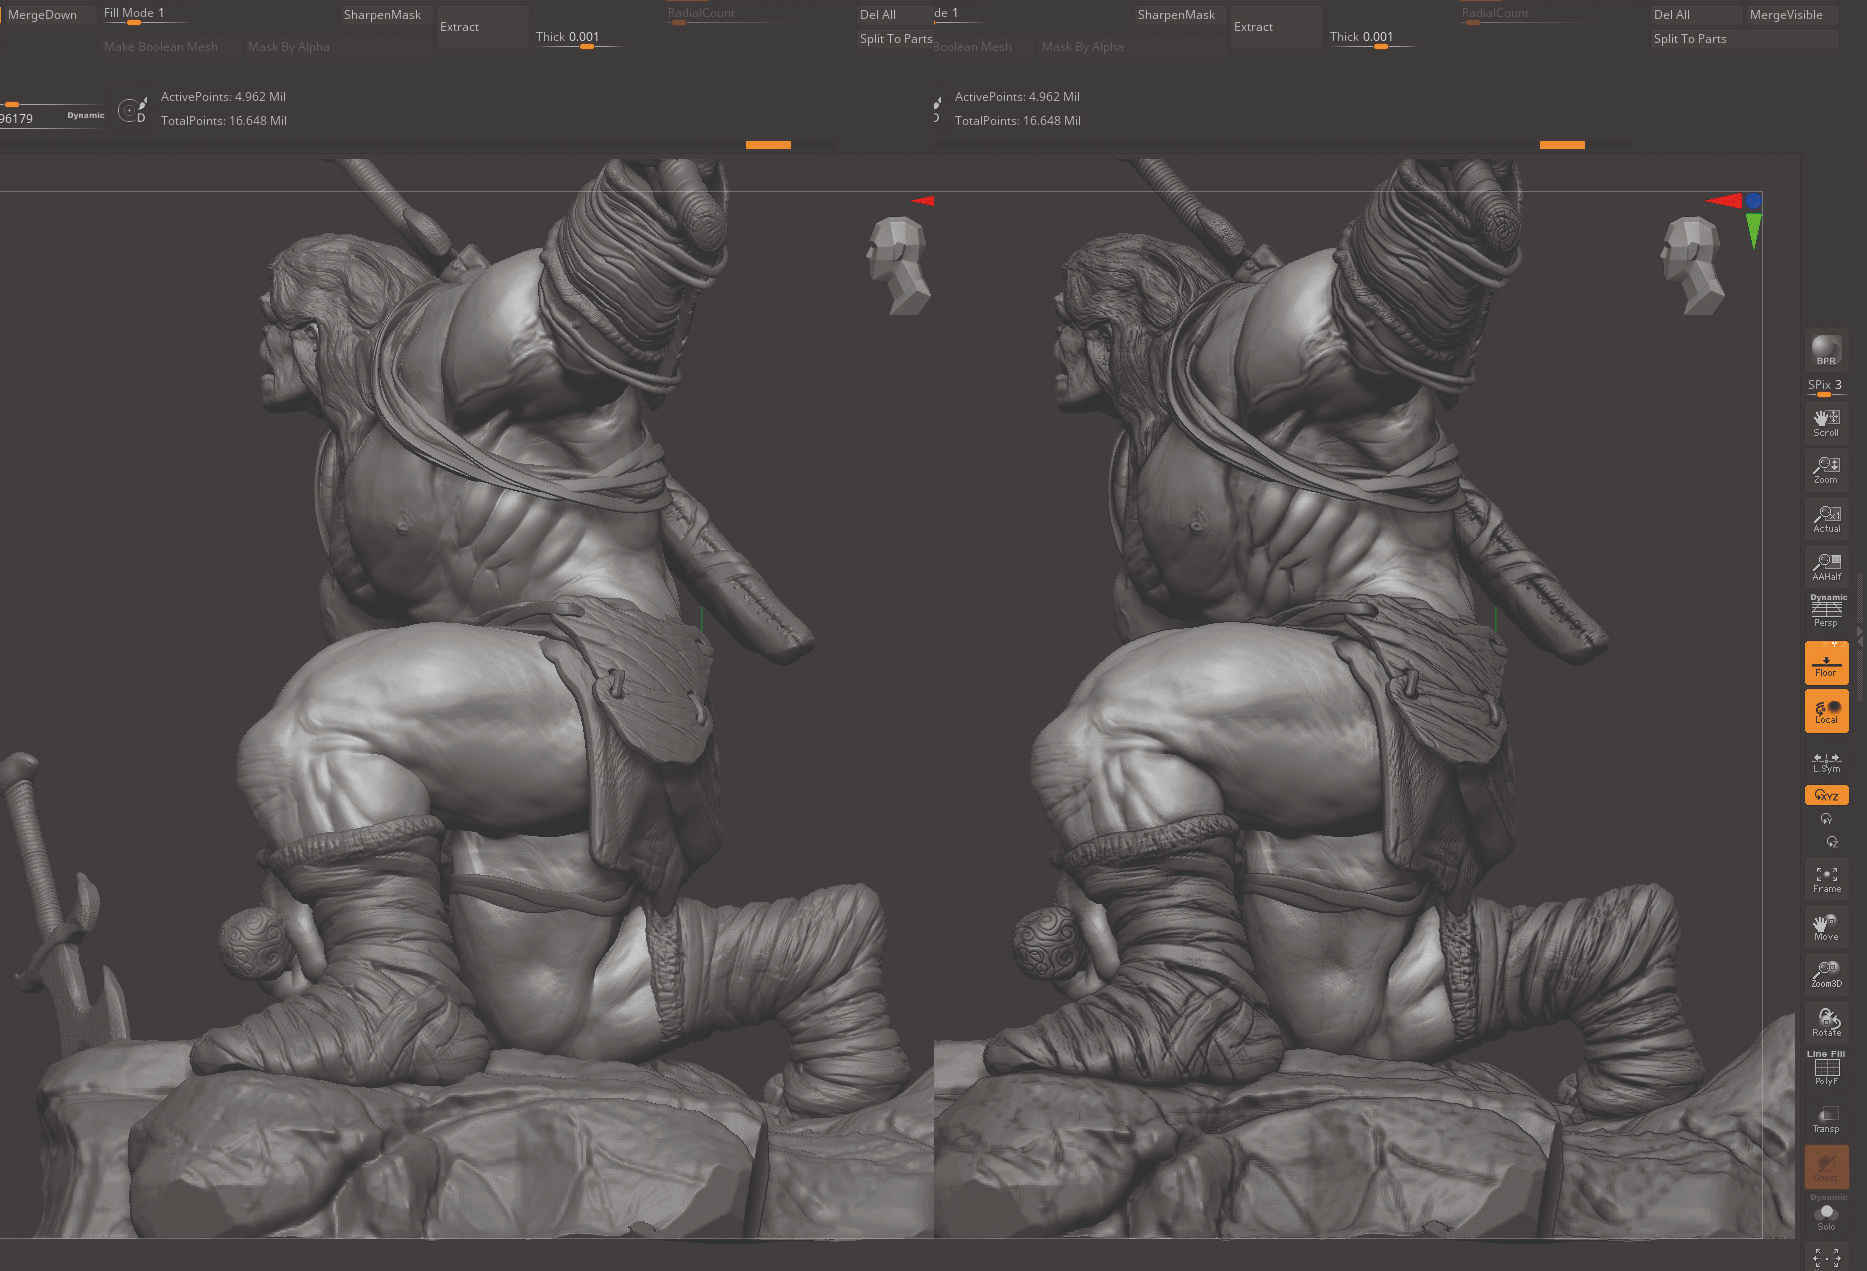 zbrush cost